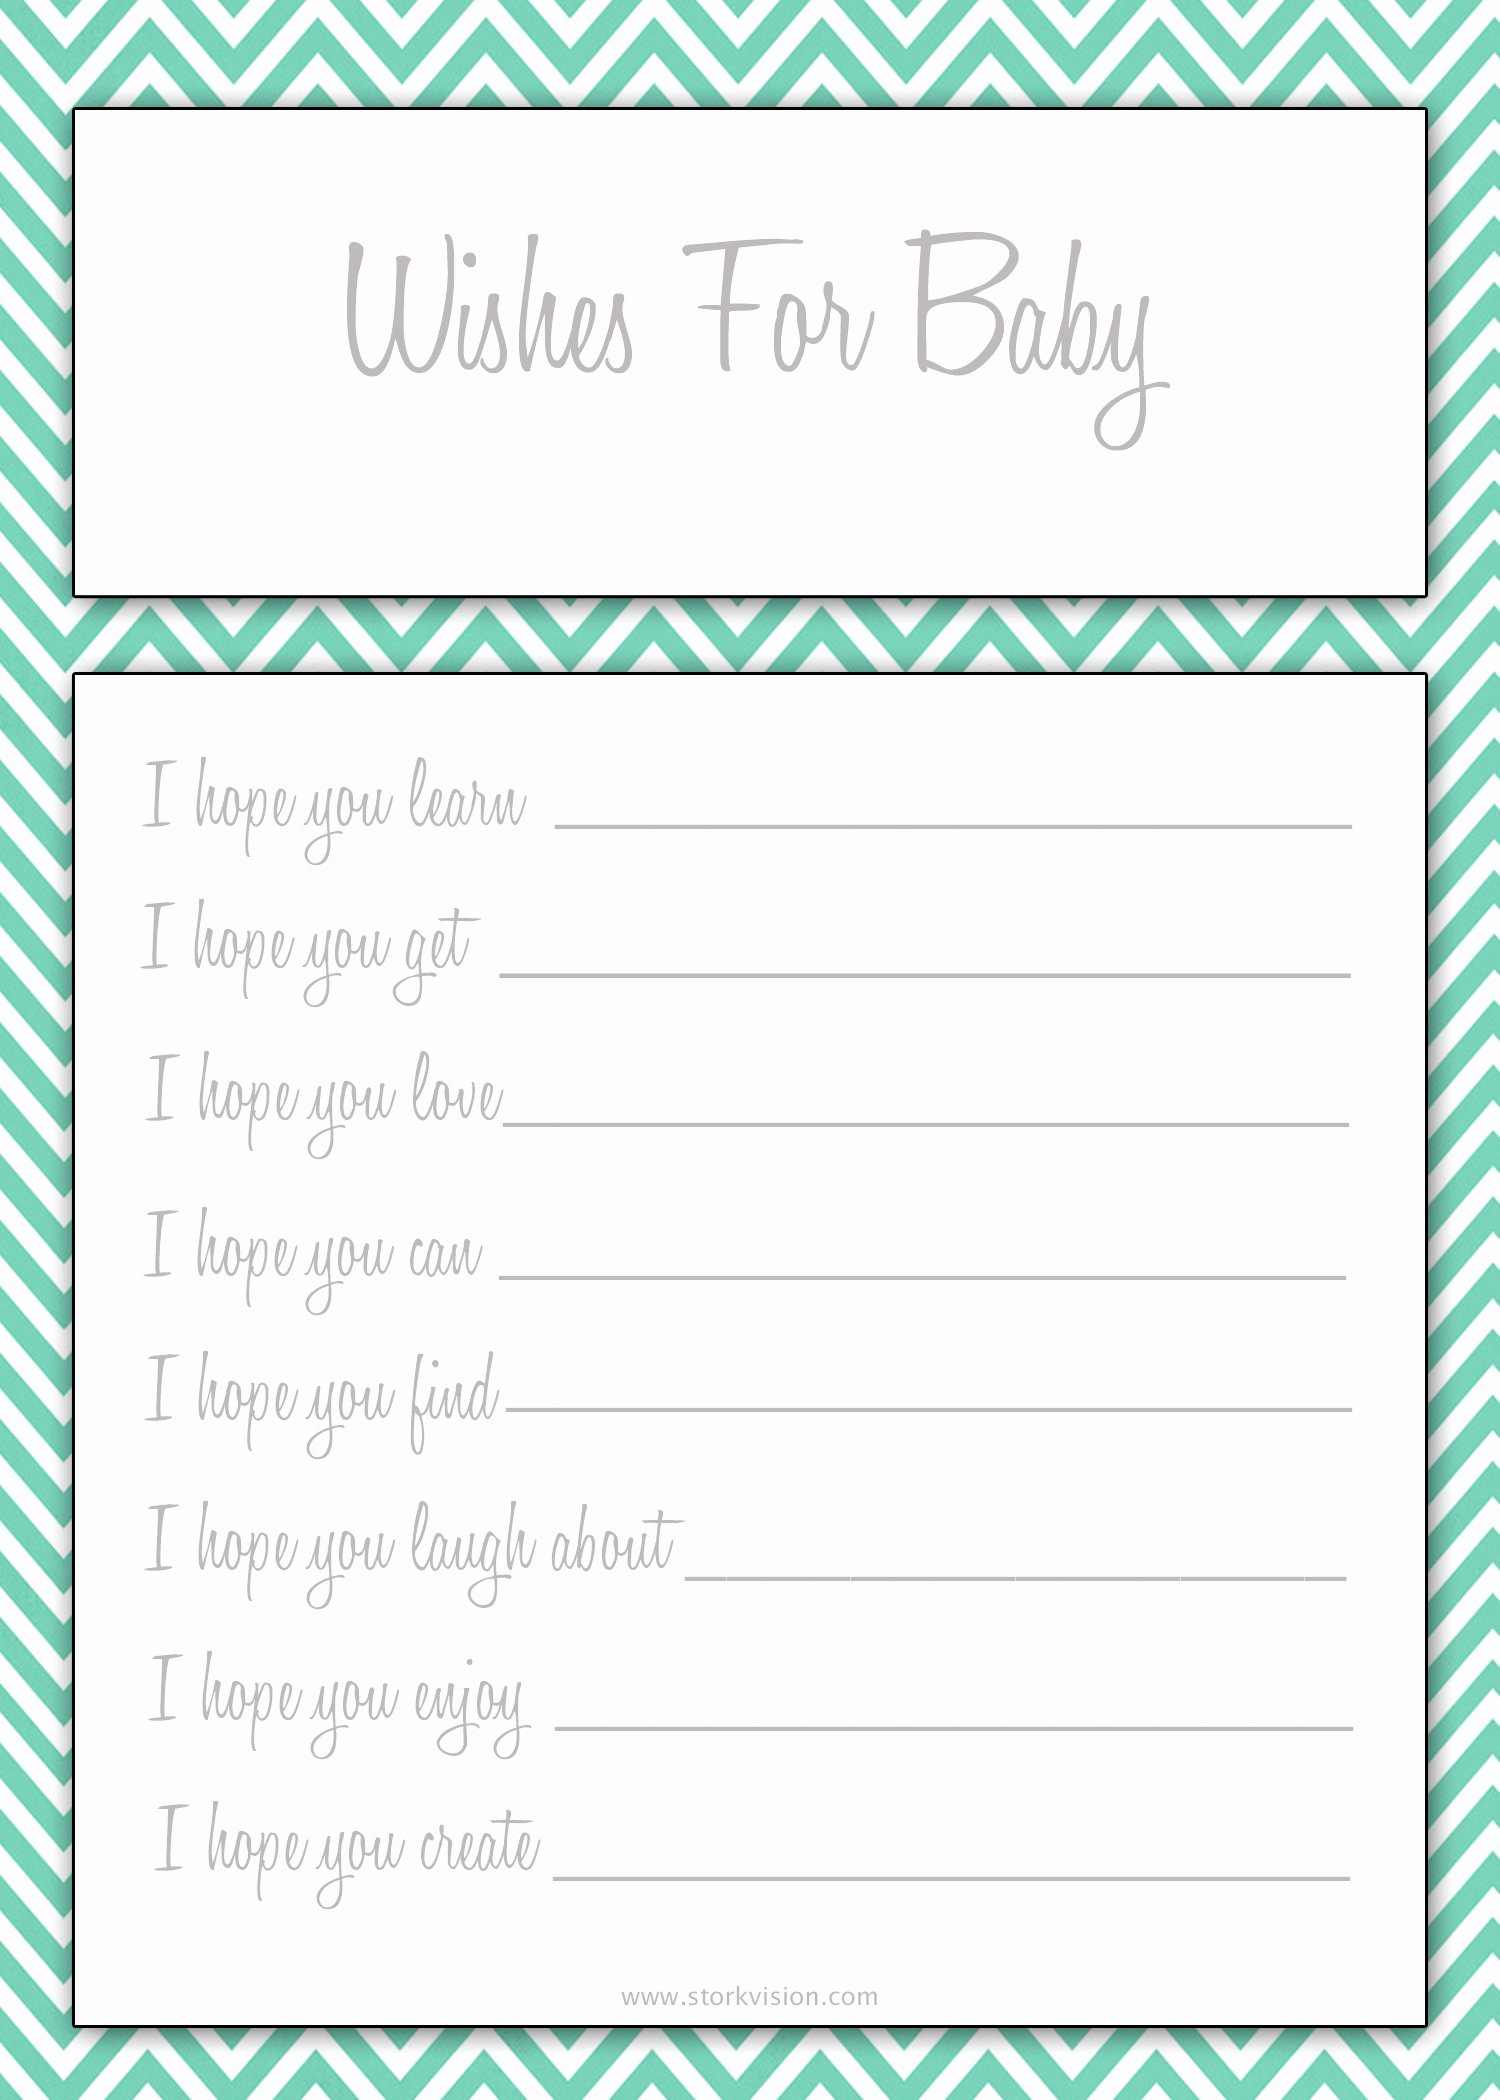 Wishes for Baby Template Unique 6 Best Of Printable Wishes for Baby Template Free